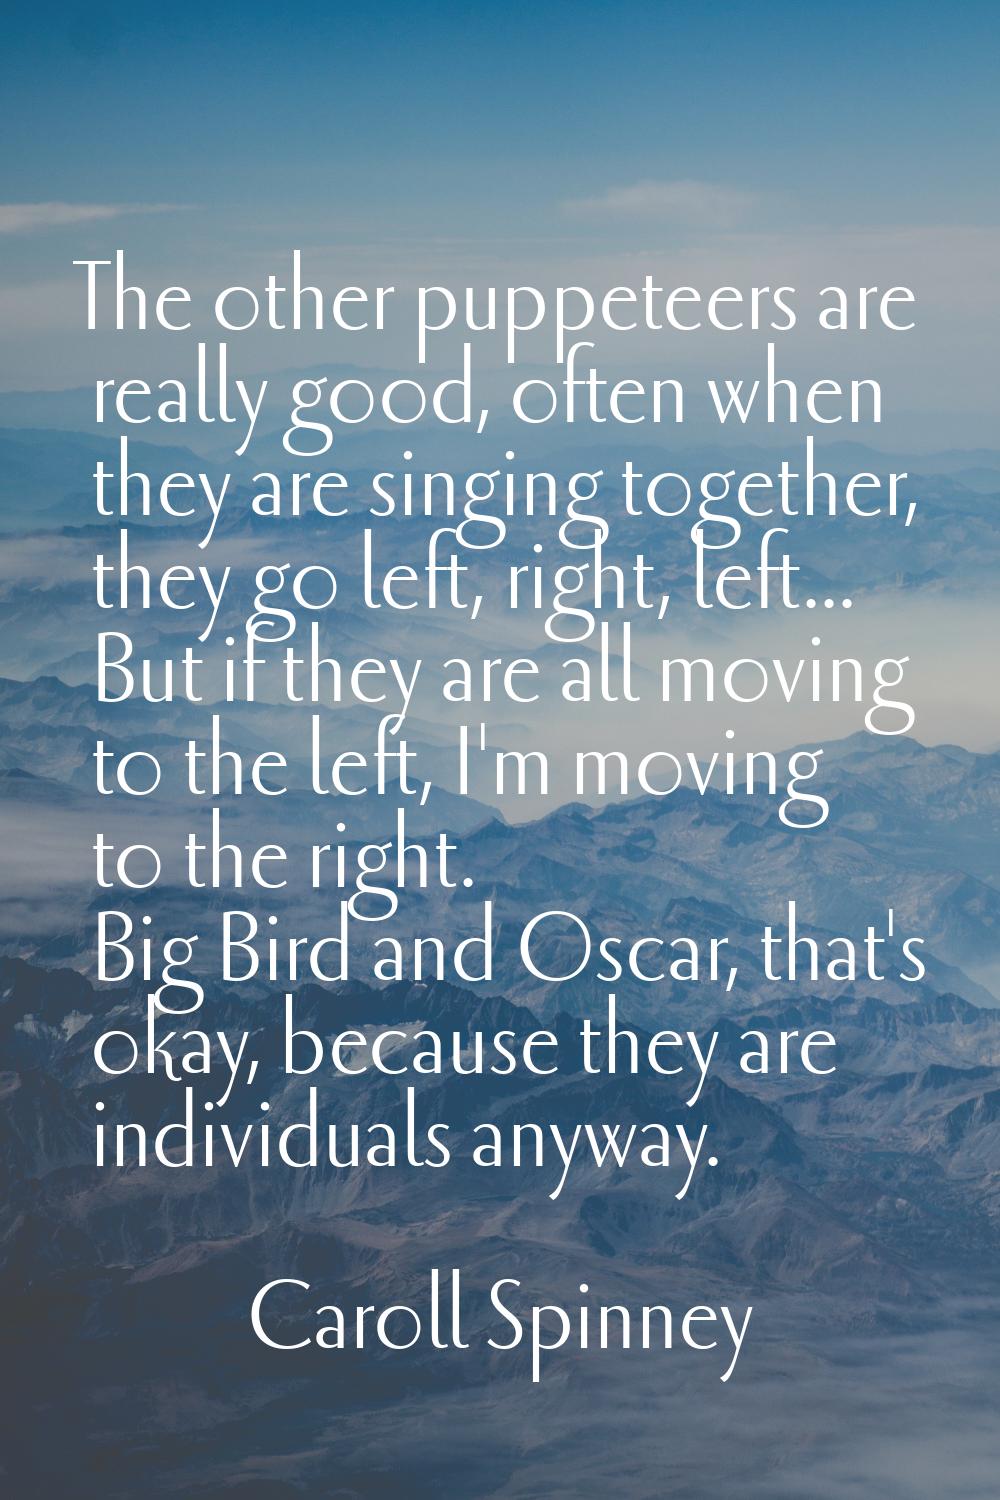 The other puppeteers are really good, often when they are singing together, they go left, right, le